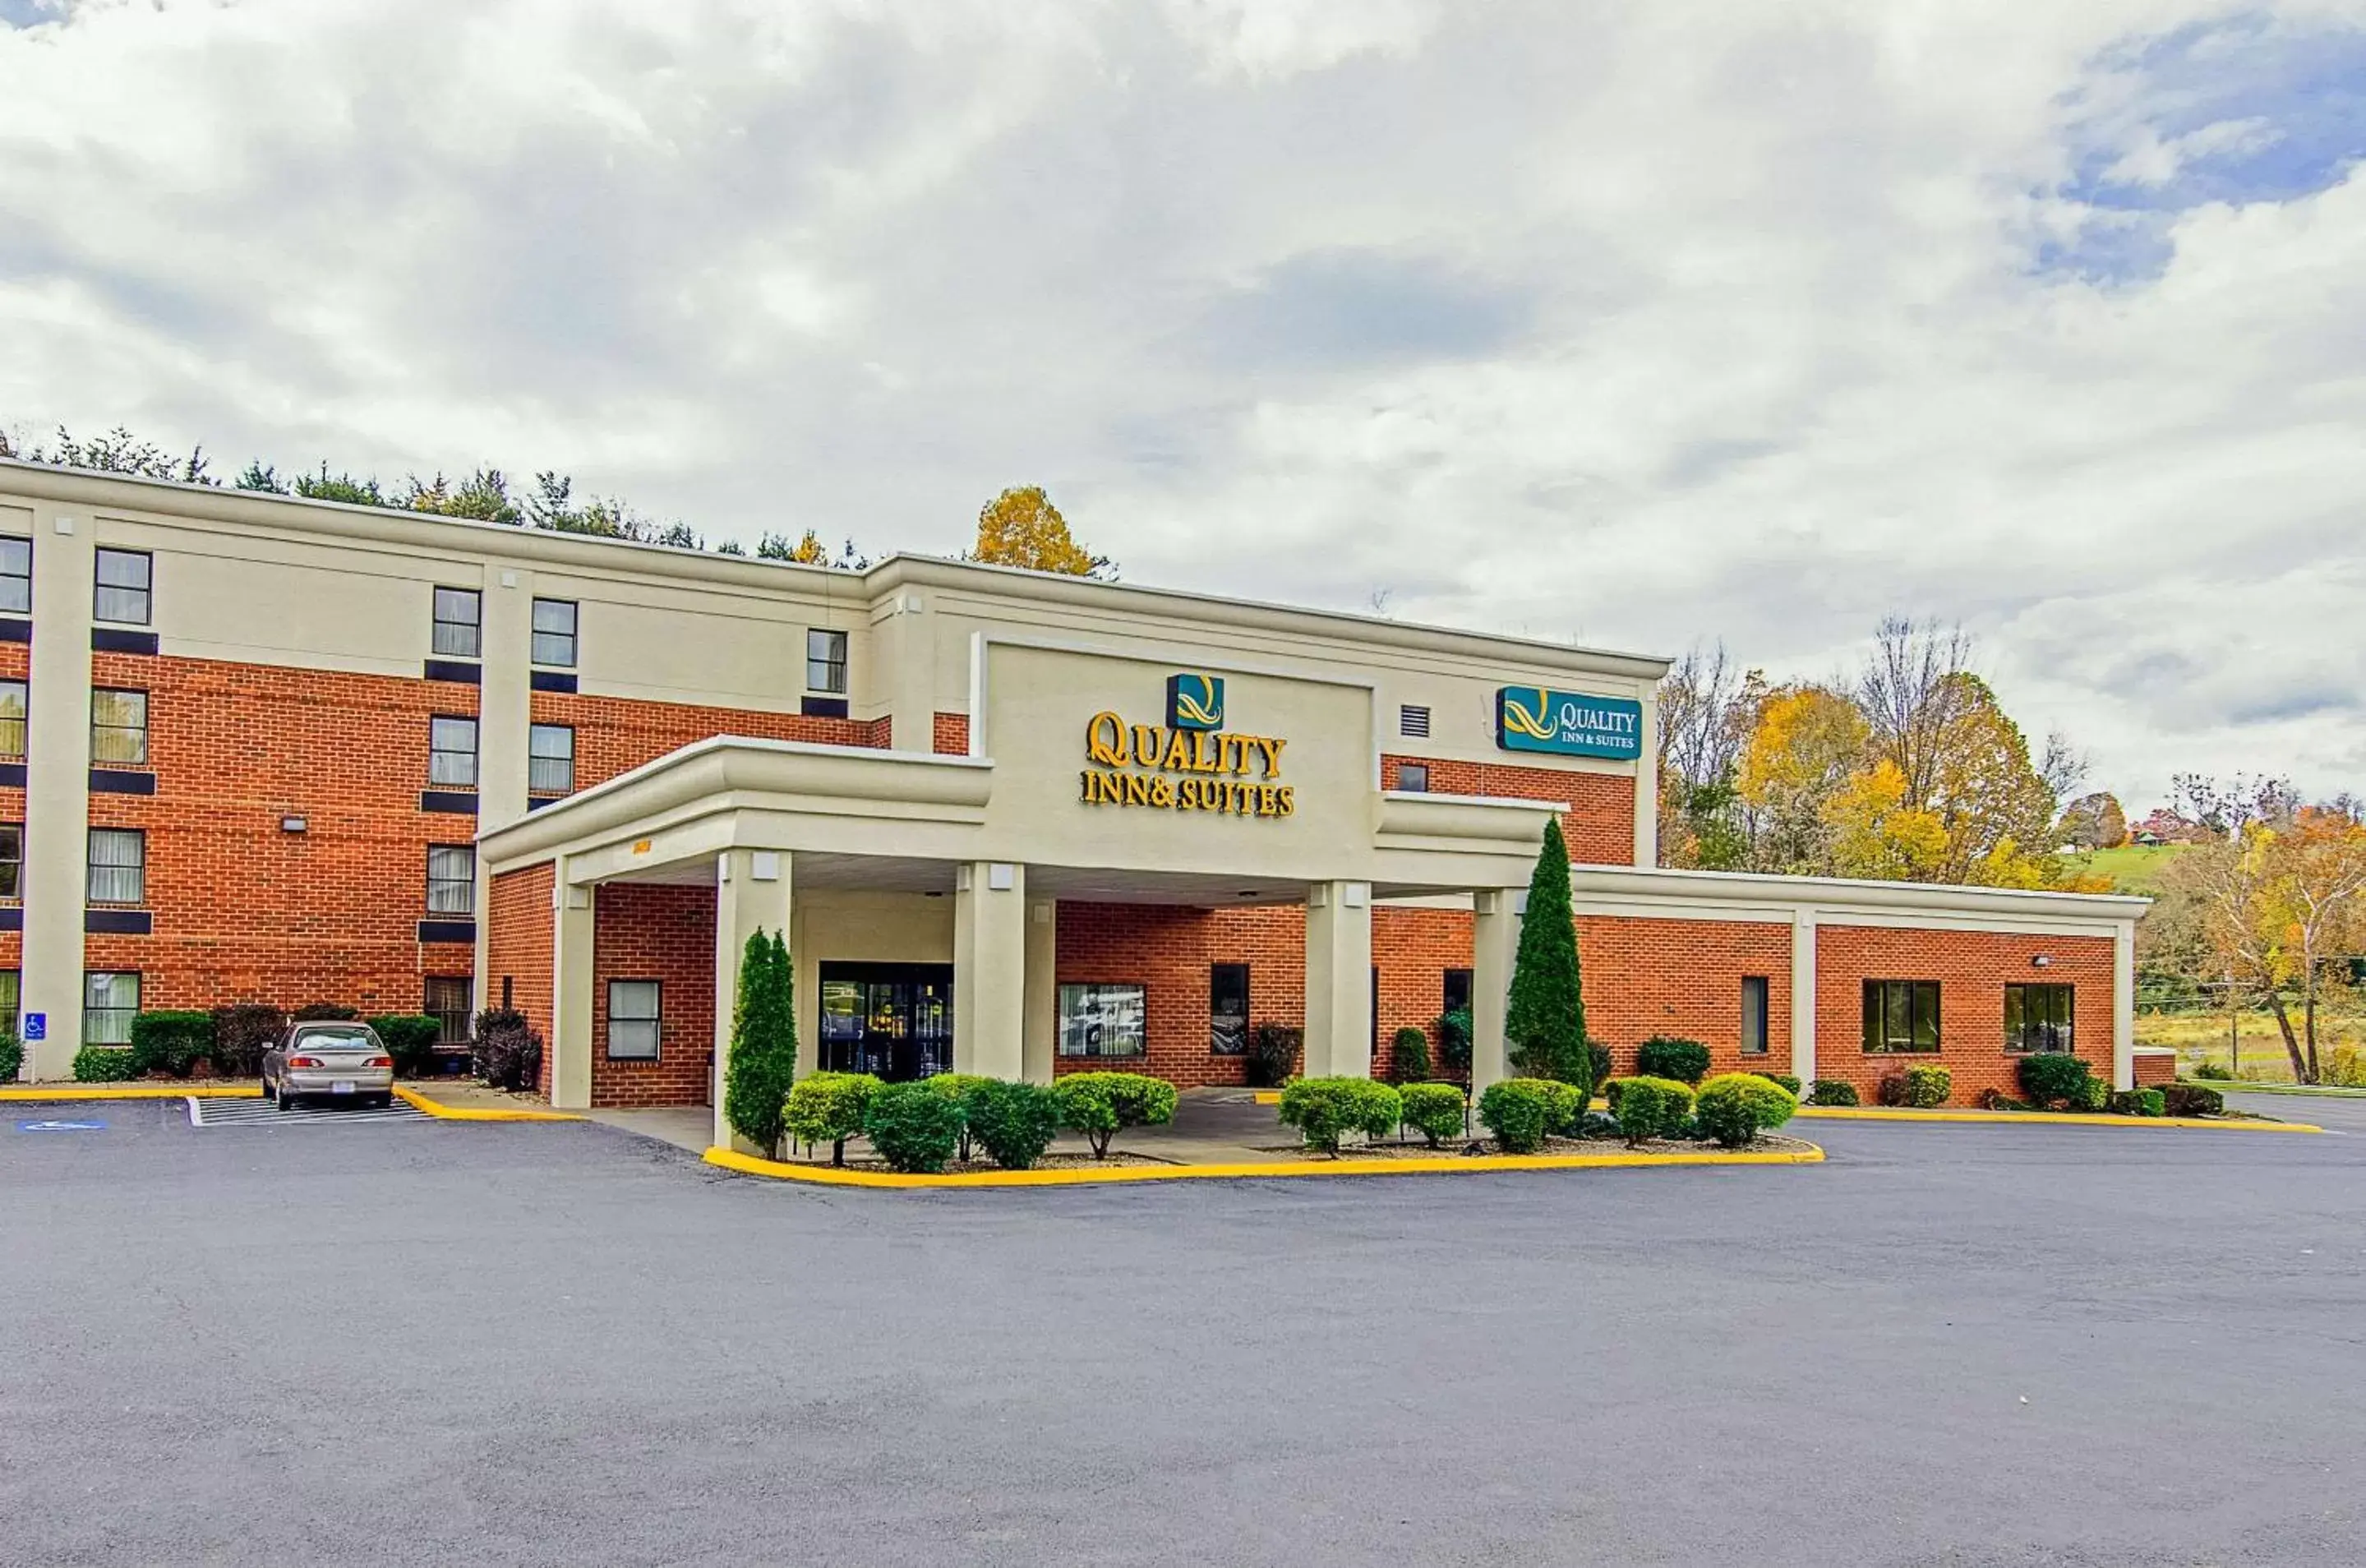 Property building in Quality Inn & Suites Lexington near I-64 and I-81